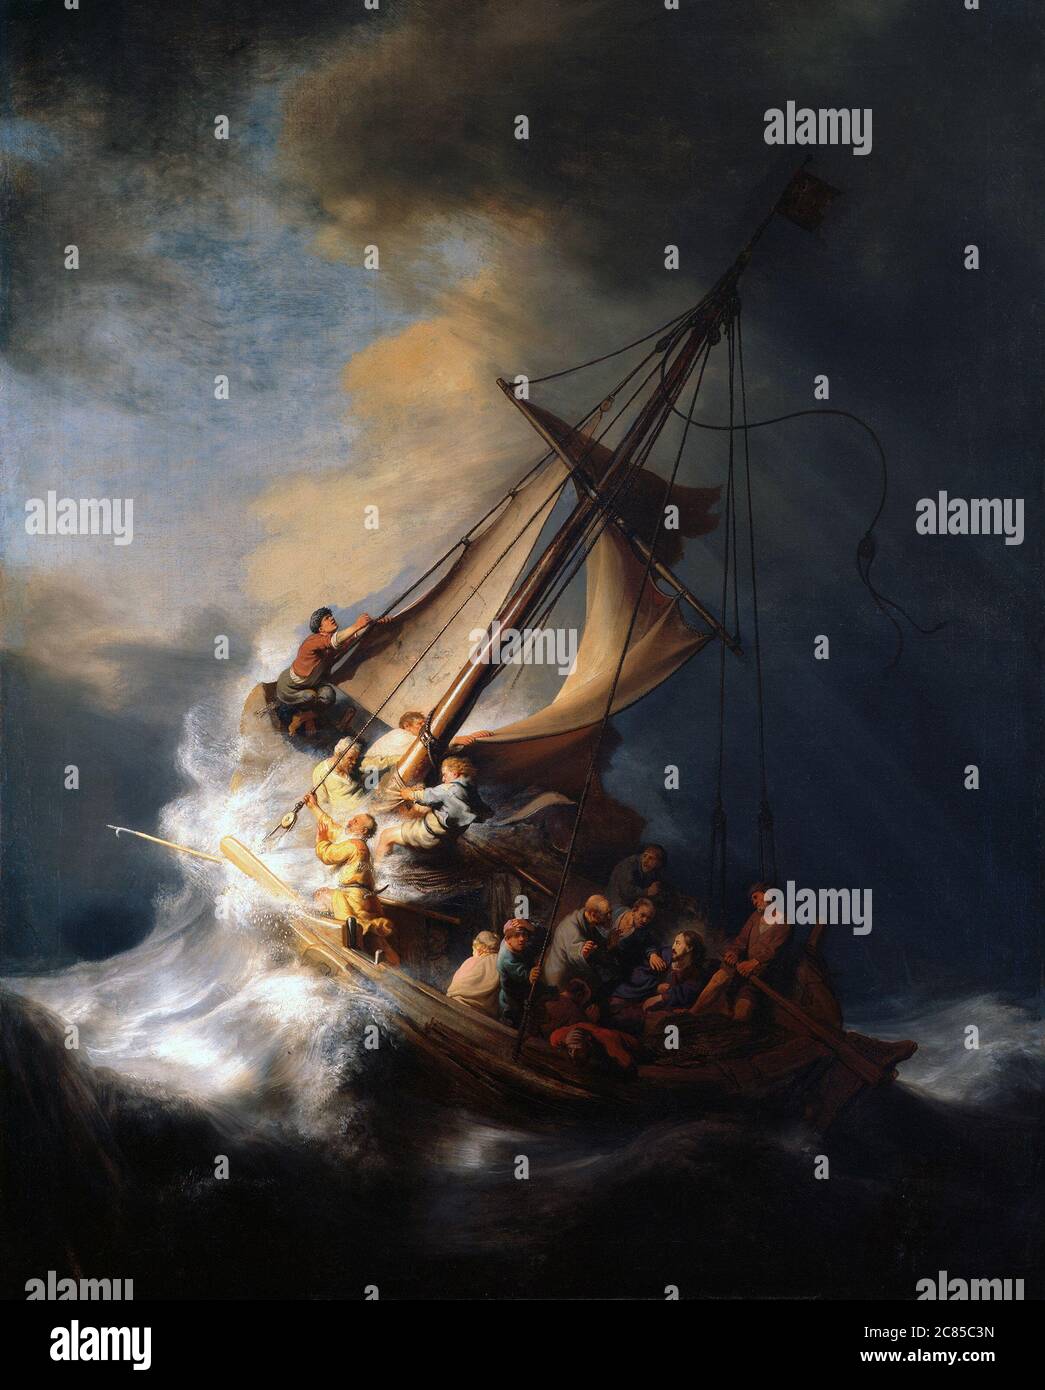 Jesus at Storm on the Galilee Sea by Rembrandt Van Rijn 1633. the Isabella Stewart Gardner Museum in Boston, USA. (theft -1990) Stock Photo